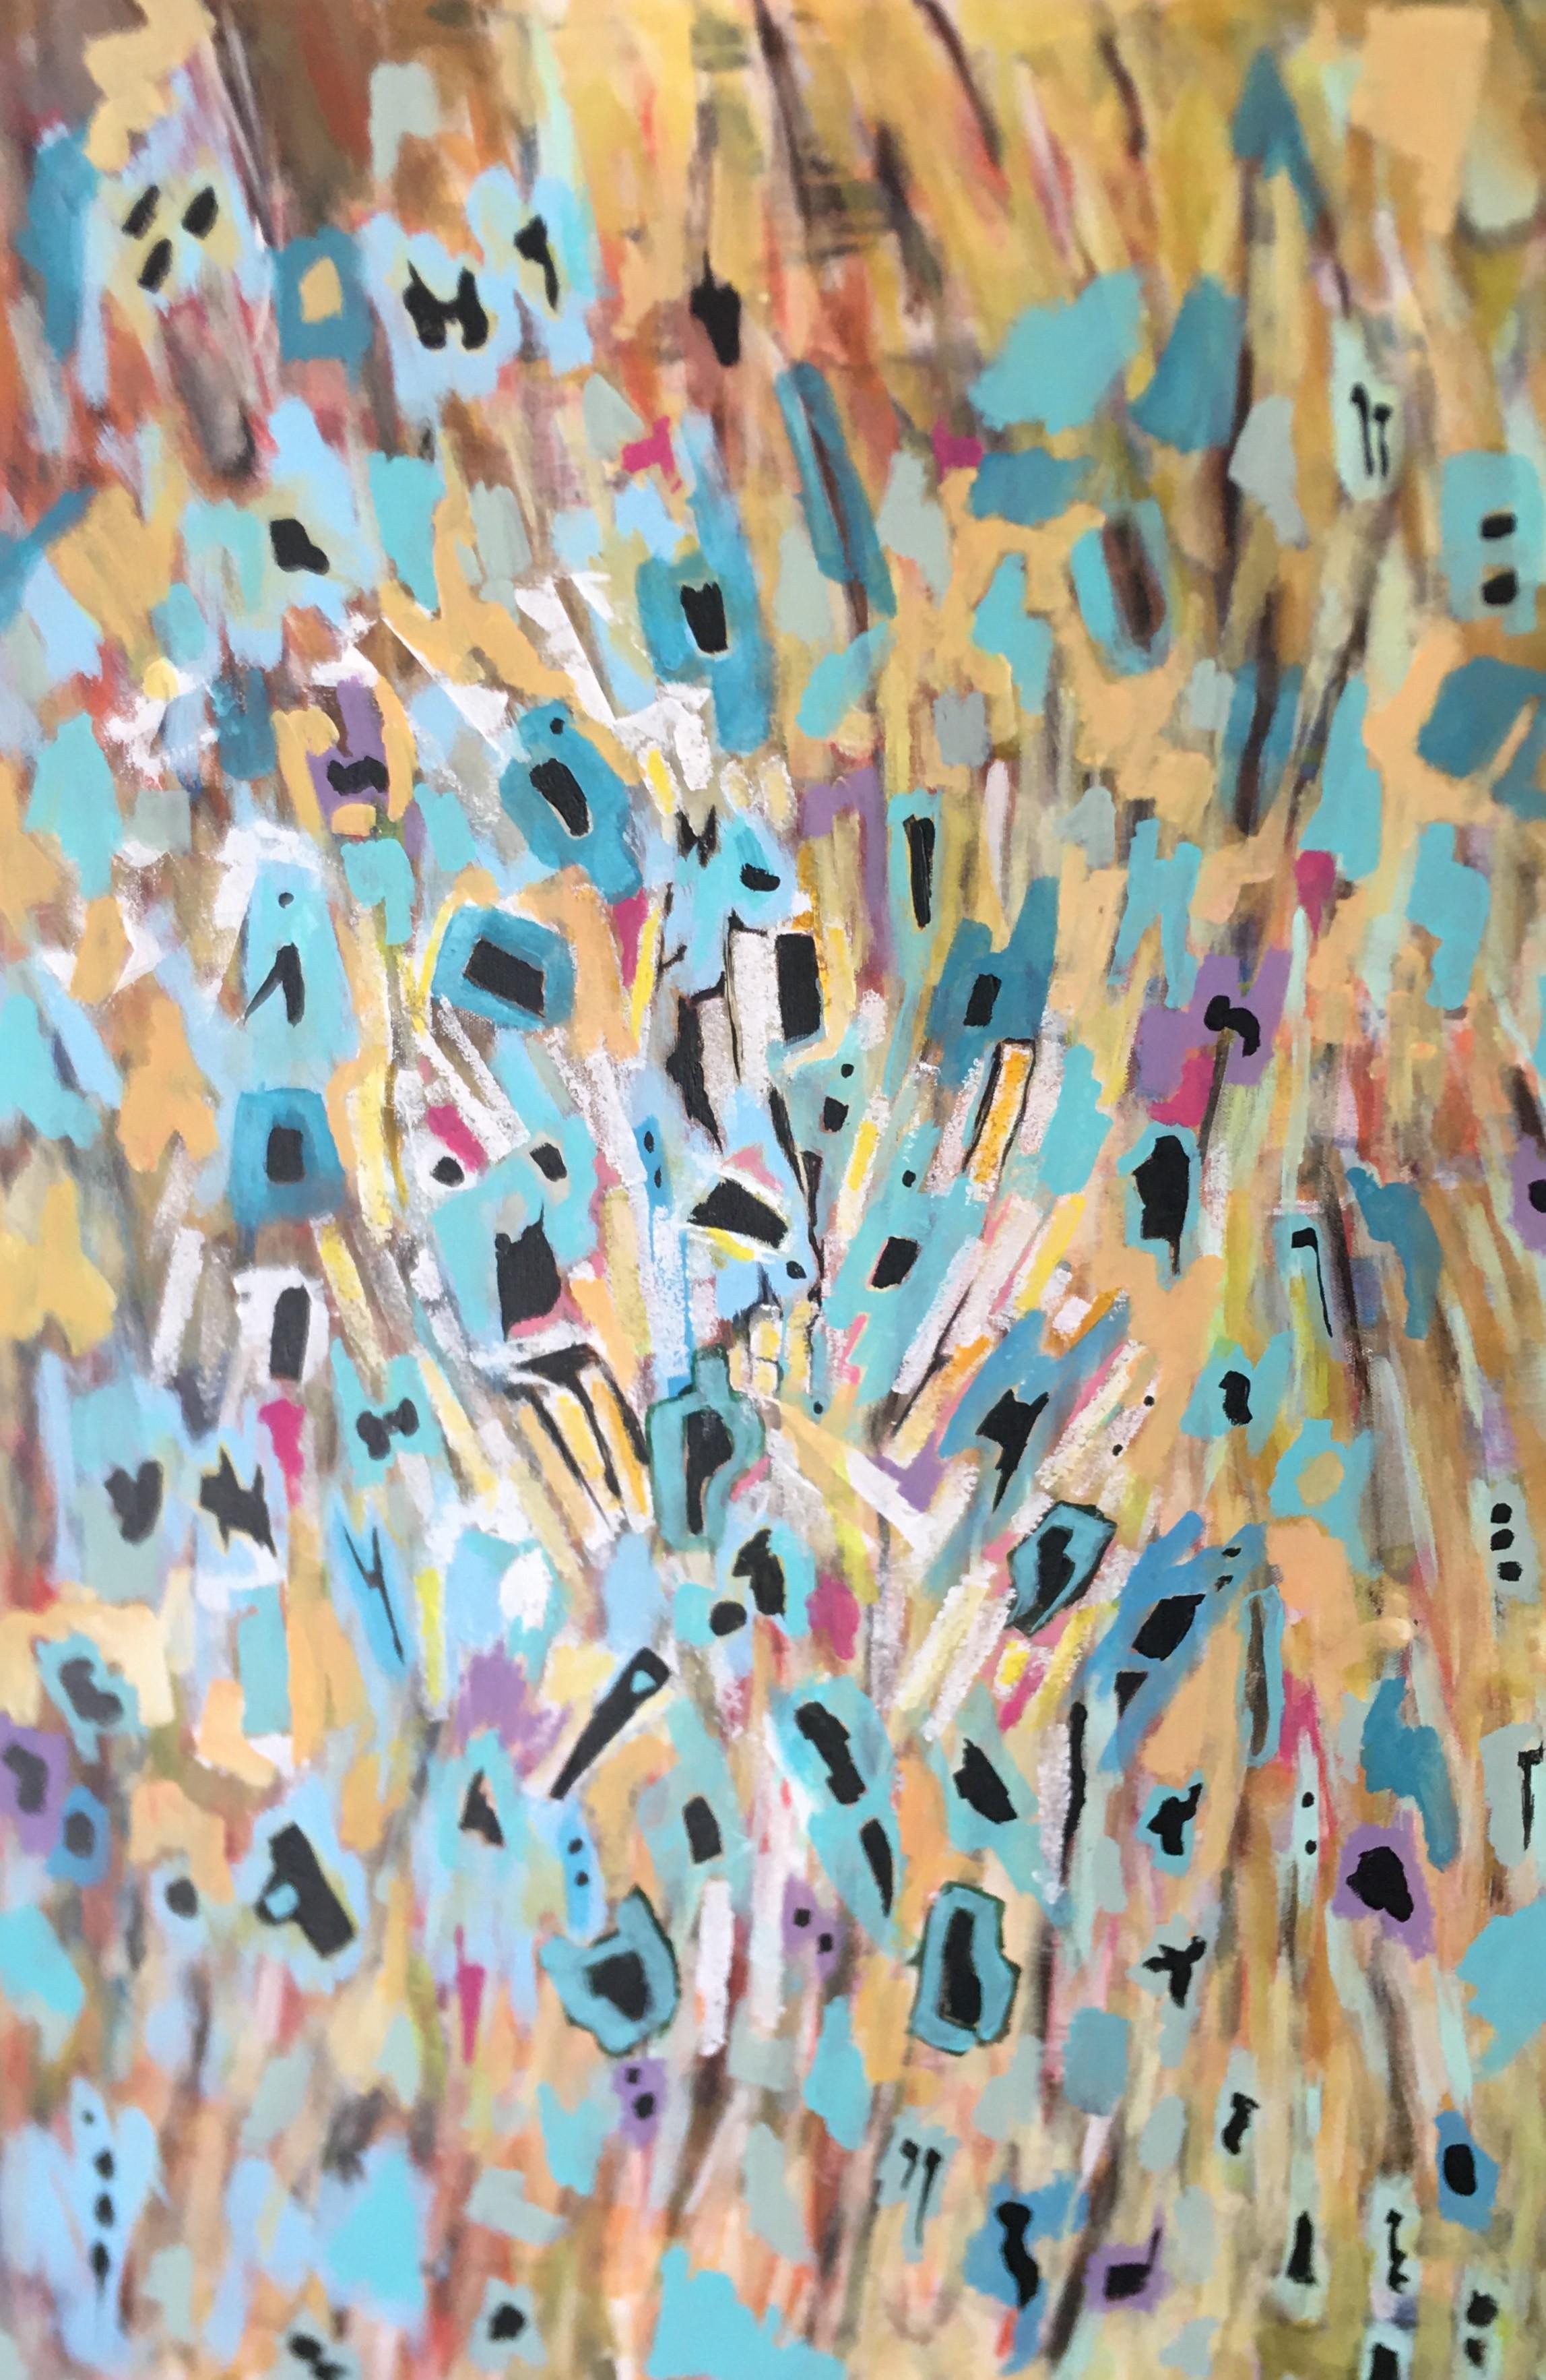 Artist Commentary:
This painting on canvas was a break from the more minimalist paintings on paper I had been doing during covid. A lighter palette with recurring forms like the lilt of a song.

Keywords: abstract, colorful, nature abstract, music,